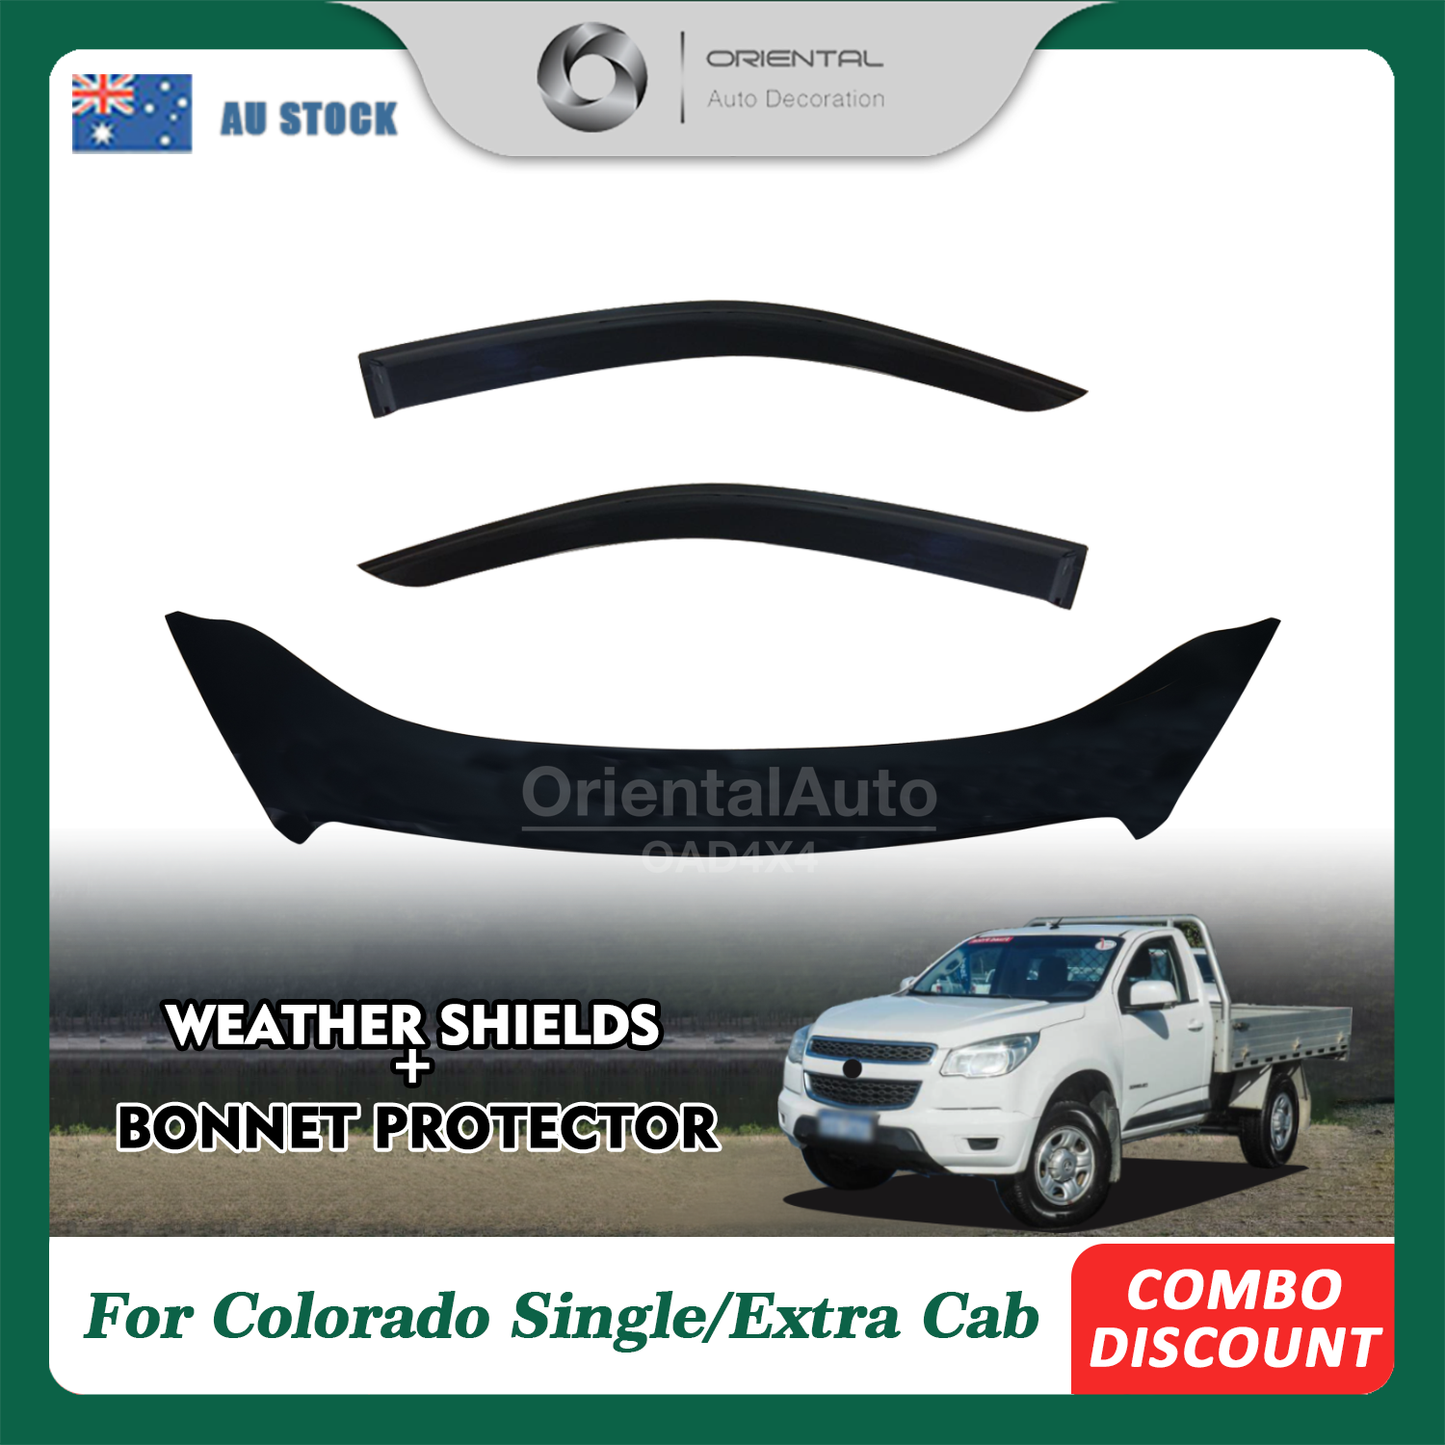 Bonnet Protector & Injection Weathershields Weather shields Window Visor For Holden Colorado RG series Single / Extra Cab 2012-2016